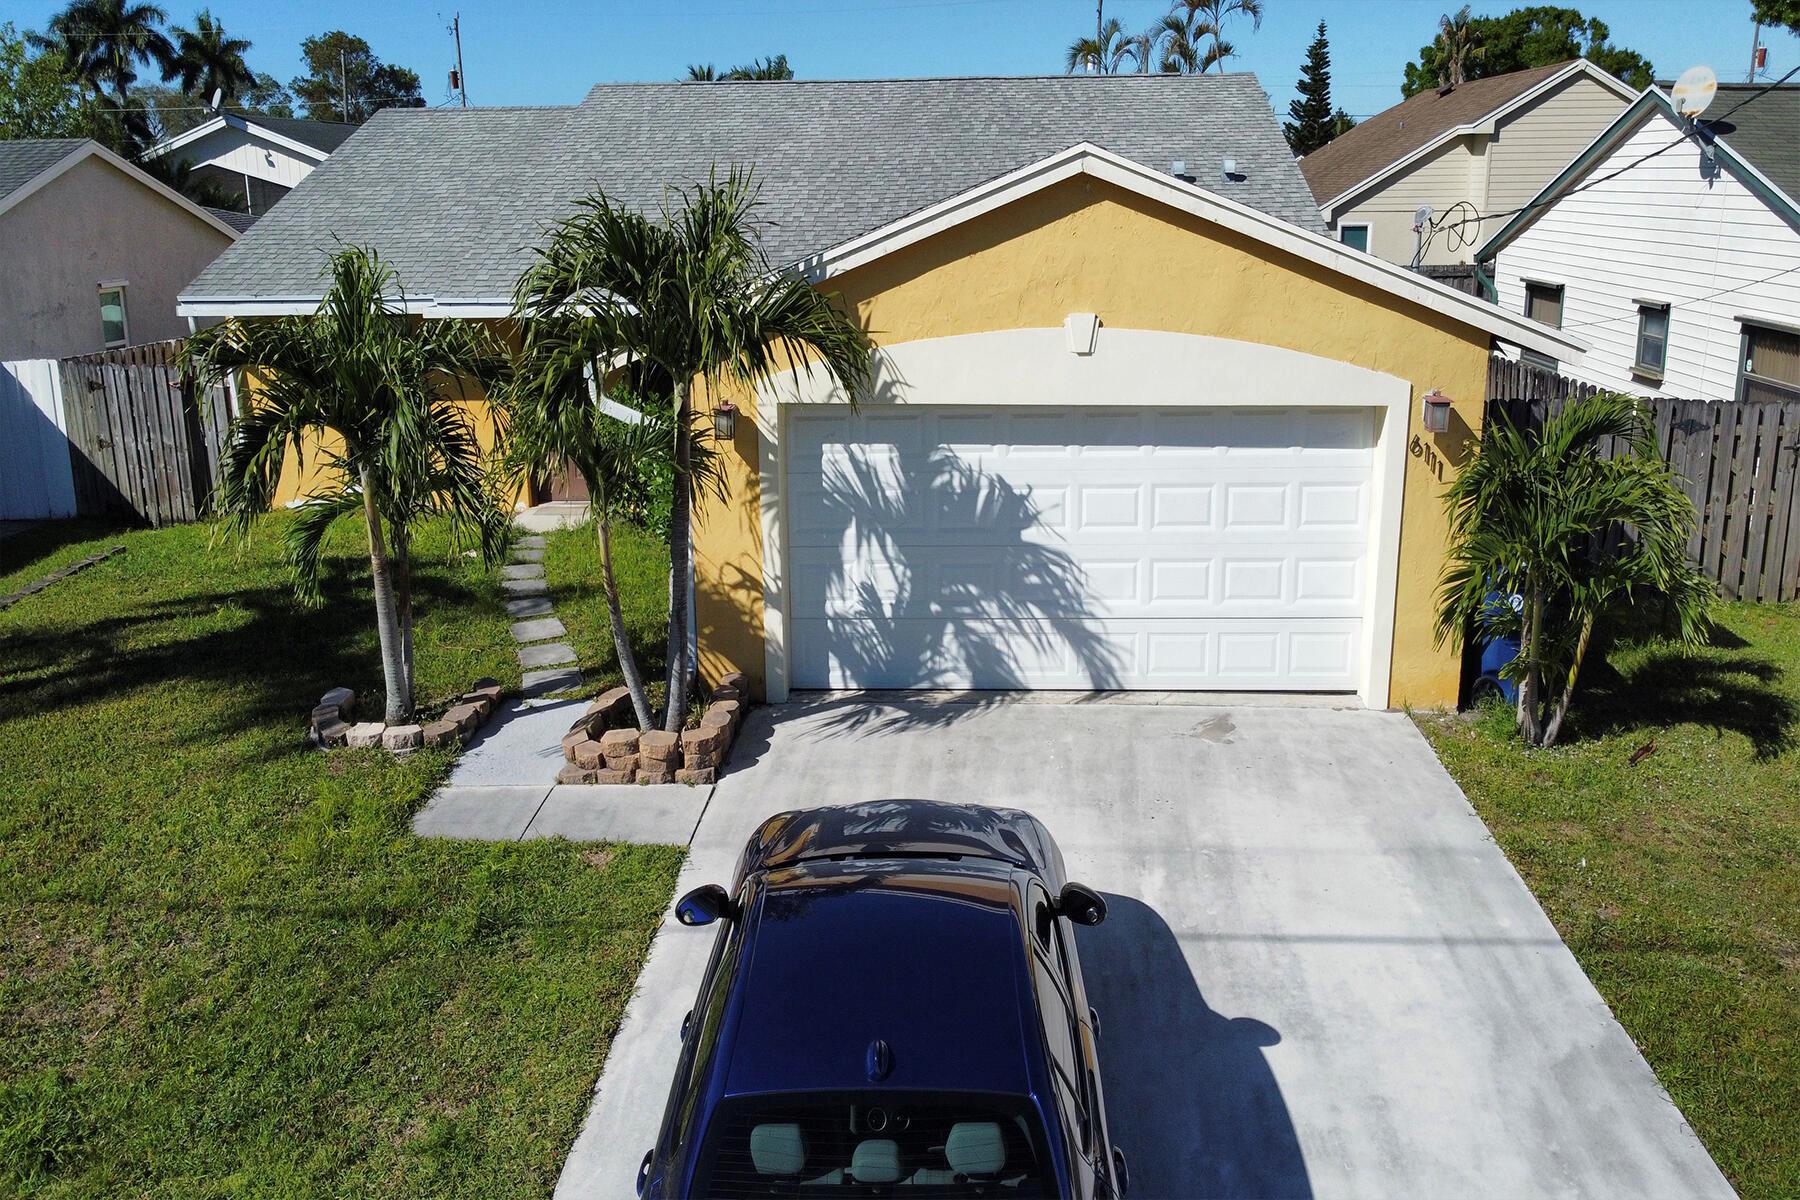 Amazing opportunity to BUY in one of Jupiter's most desire neighborhoods with NO HOA. CBS Property has been updated, NEWER kitchen cabinets, granite counter tops, and kitchen appliances, as well as NEWER W/D included. Both bathrooms updated, with new vanity & granite counter tops. This home enjoys an open floor plan with split bedrooms, big windows for natural light, surrounding wooden deck for great outdoor entertainment & relaxation. Laminate flooring through entire house with tile in kitchen and bathrooms. The Heights is know for its friendly neighbors & community events & Local community perk. Minutes away from FAU, Abacoa downtown, Roger Dean Stadium, Habourside Place, New Alton community, Max Planck, SCRIPPS and some of the best beaches in PBC, including a dog beach and park.